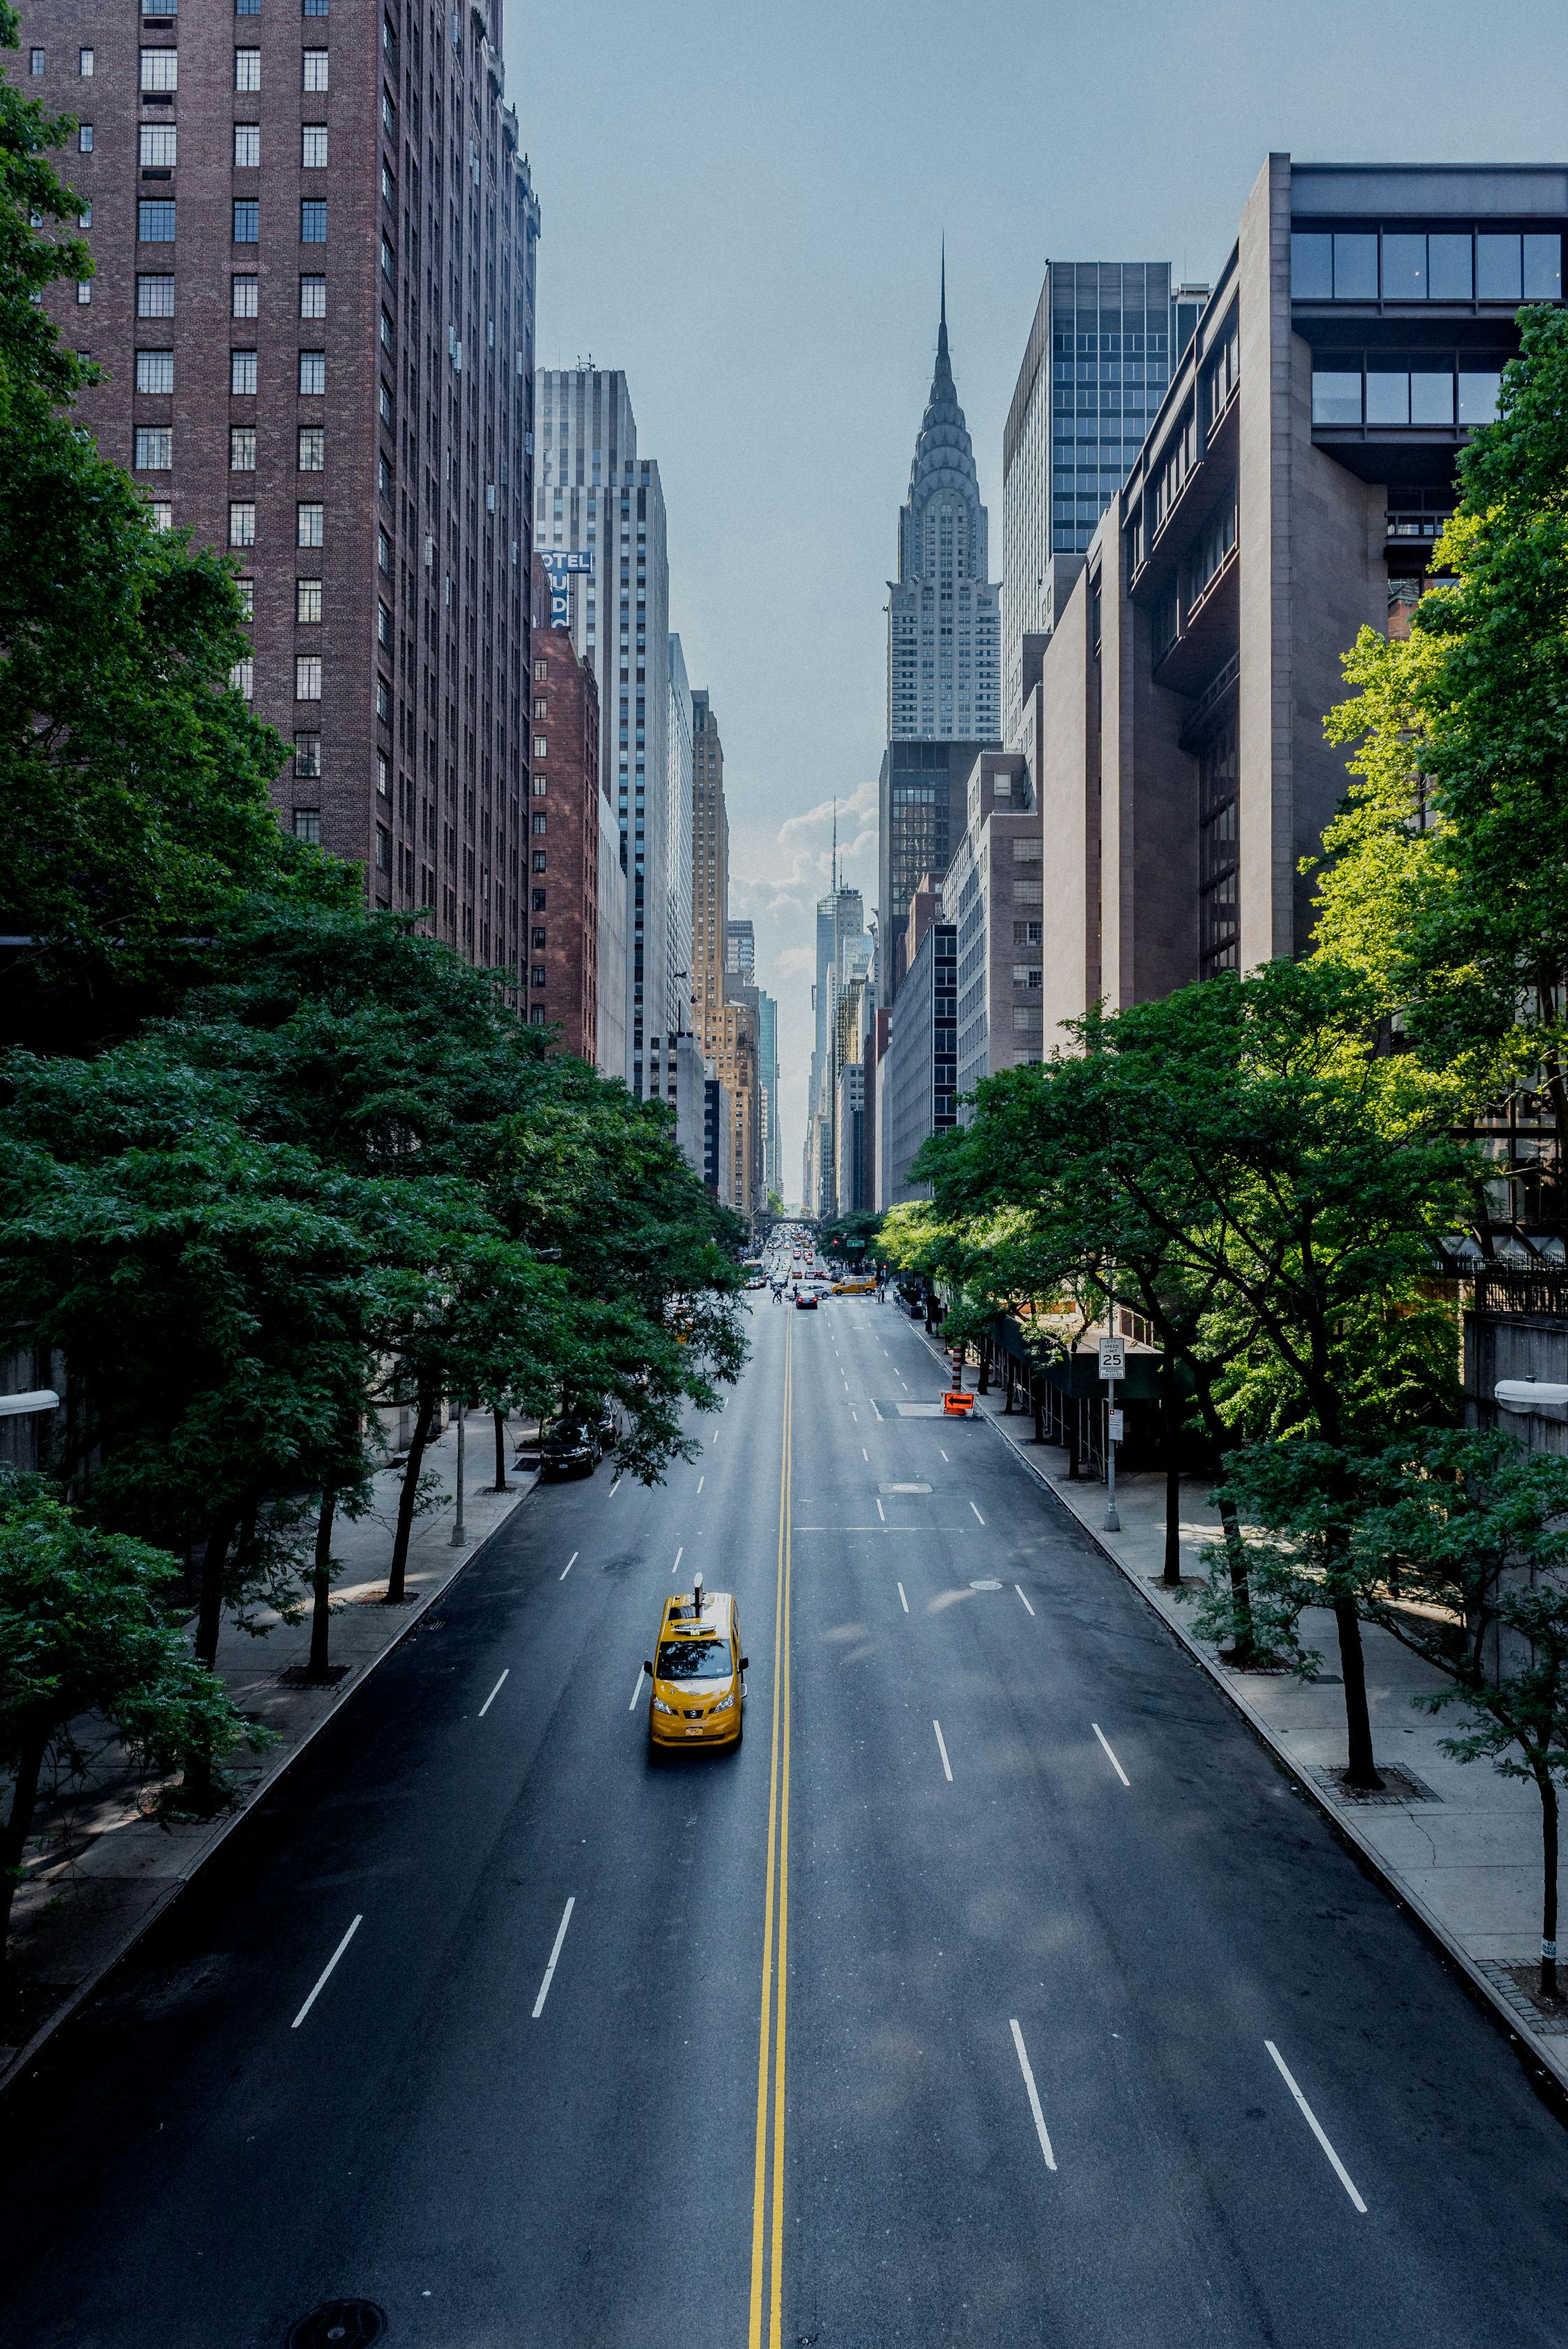 A yellow car drives along the avenue against the backdrop of high-rise buildings